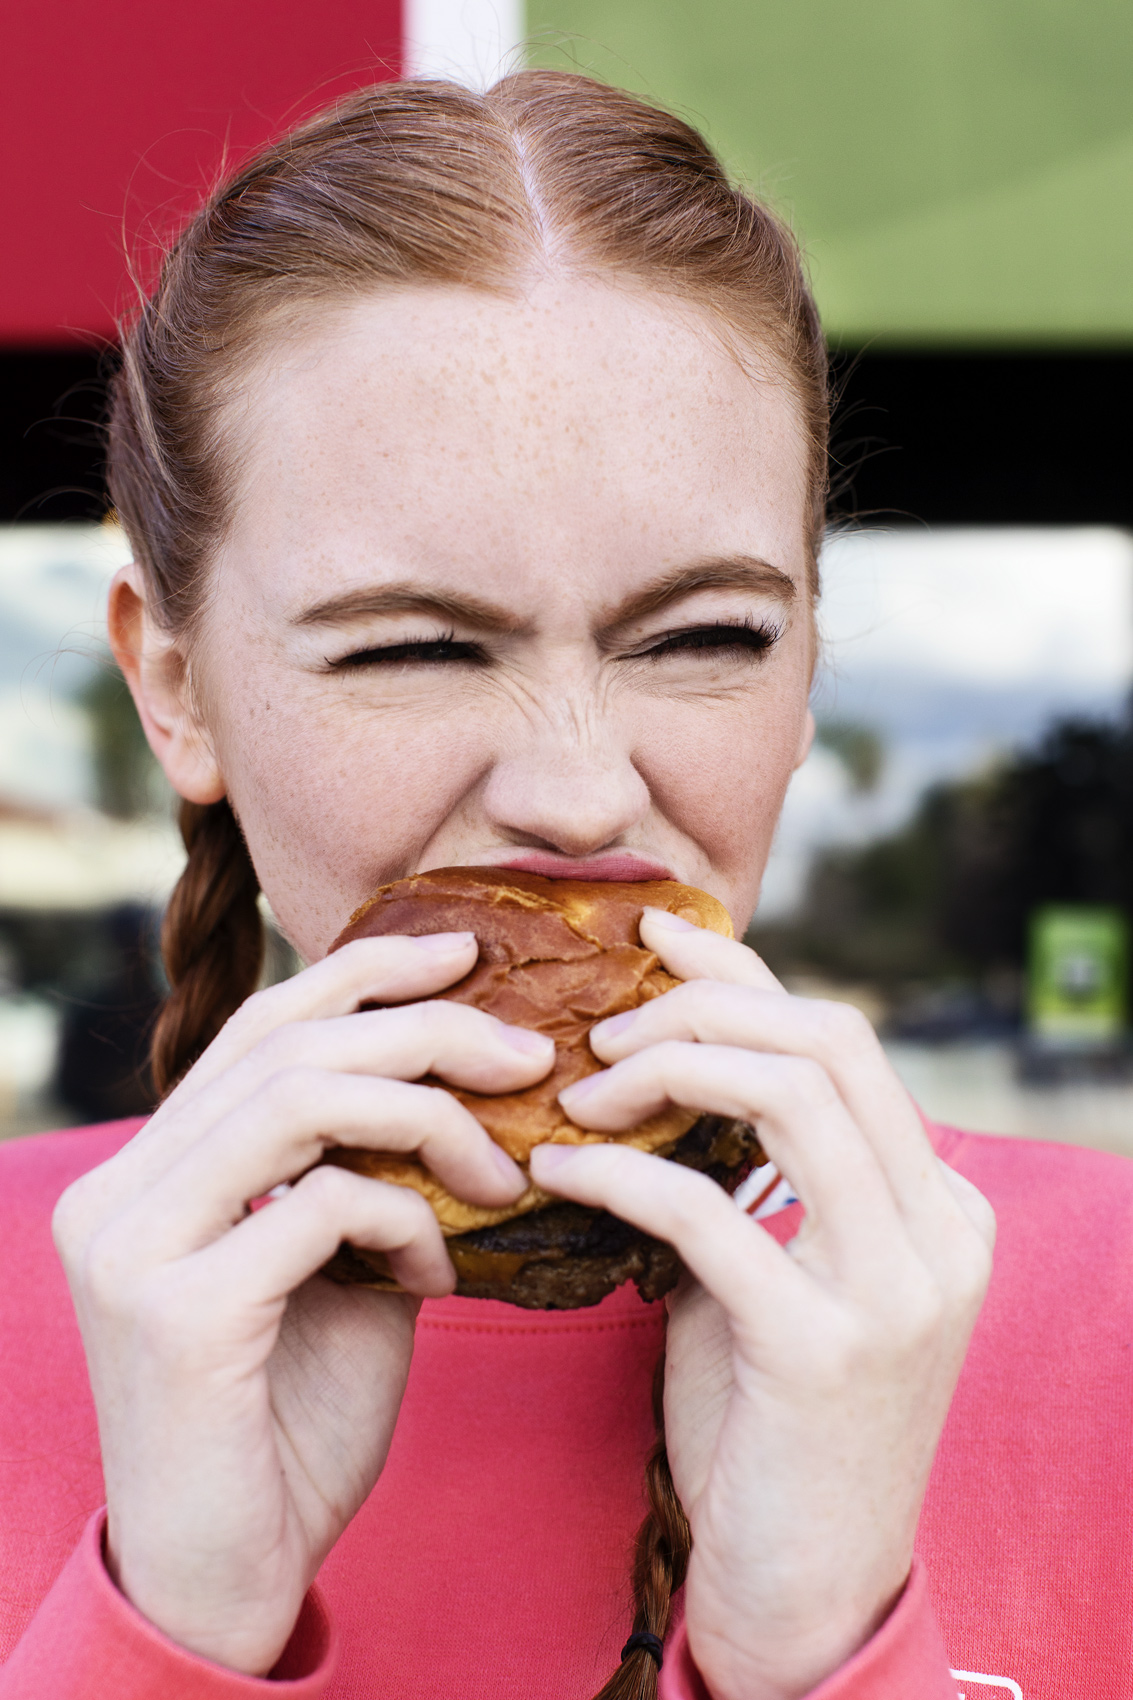 Girl with red hair eating a hamburger outside. Kim Genevieve Los Angeles Lifestyle Photographer